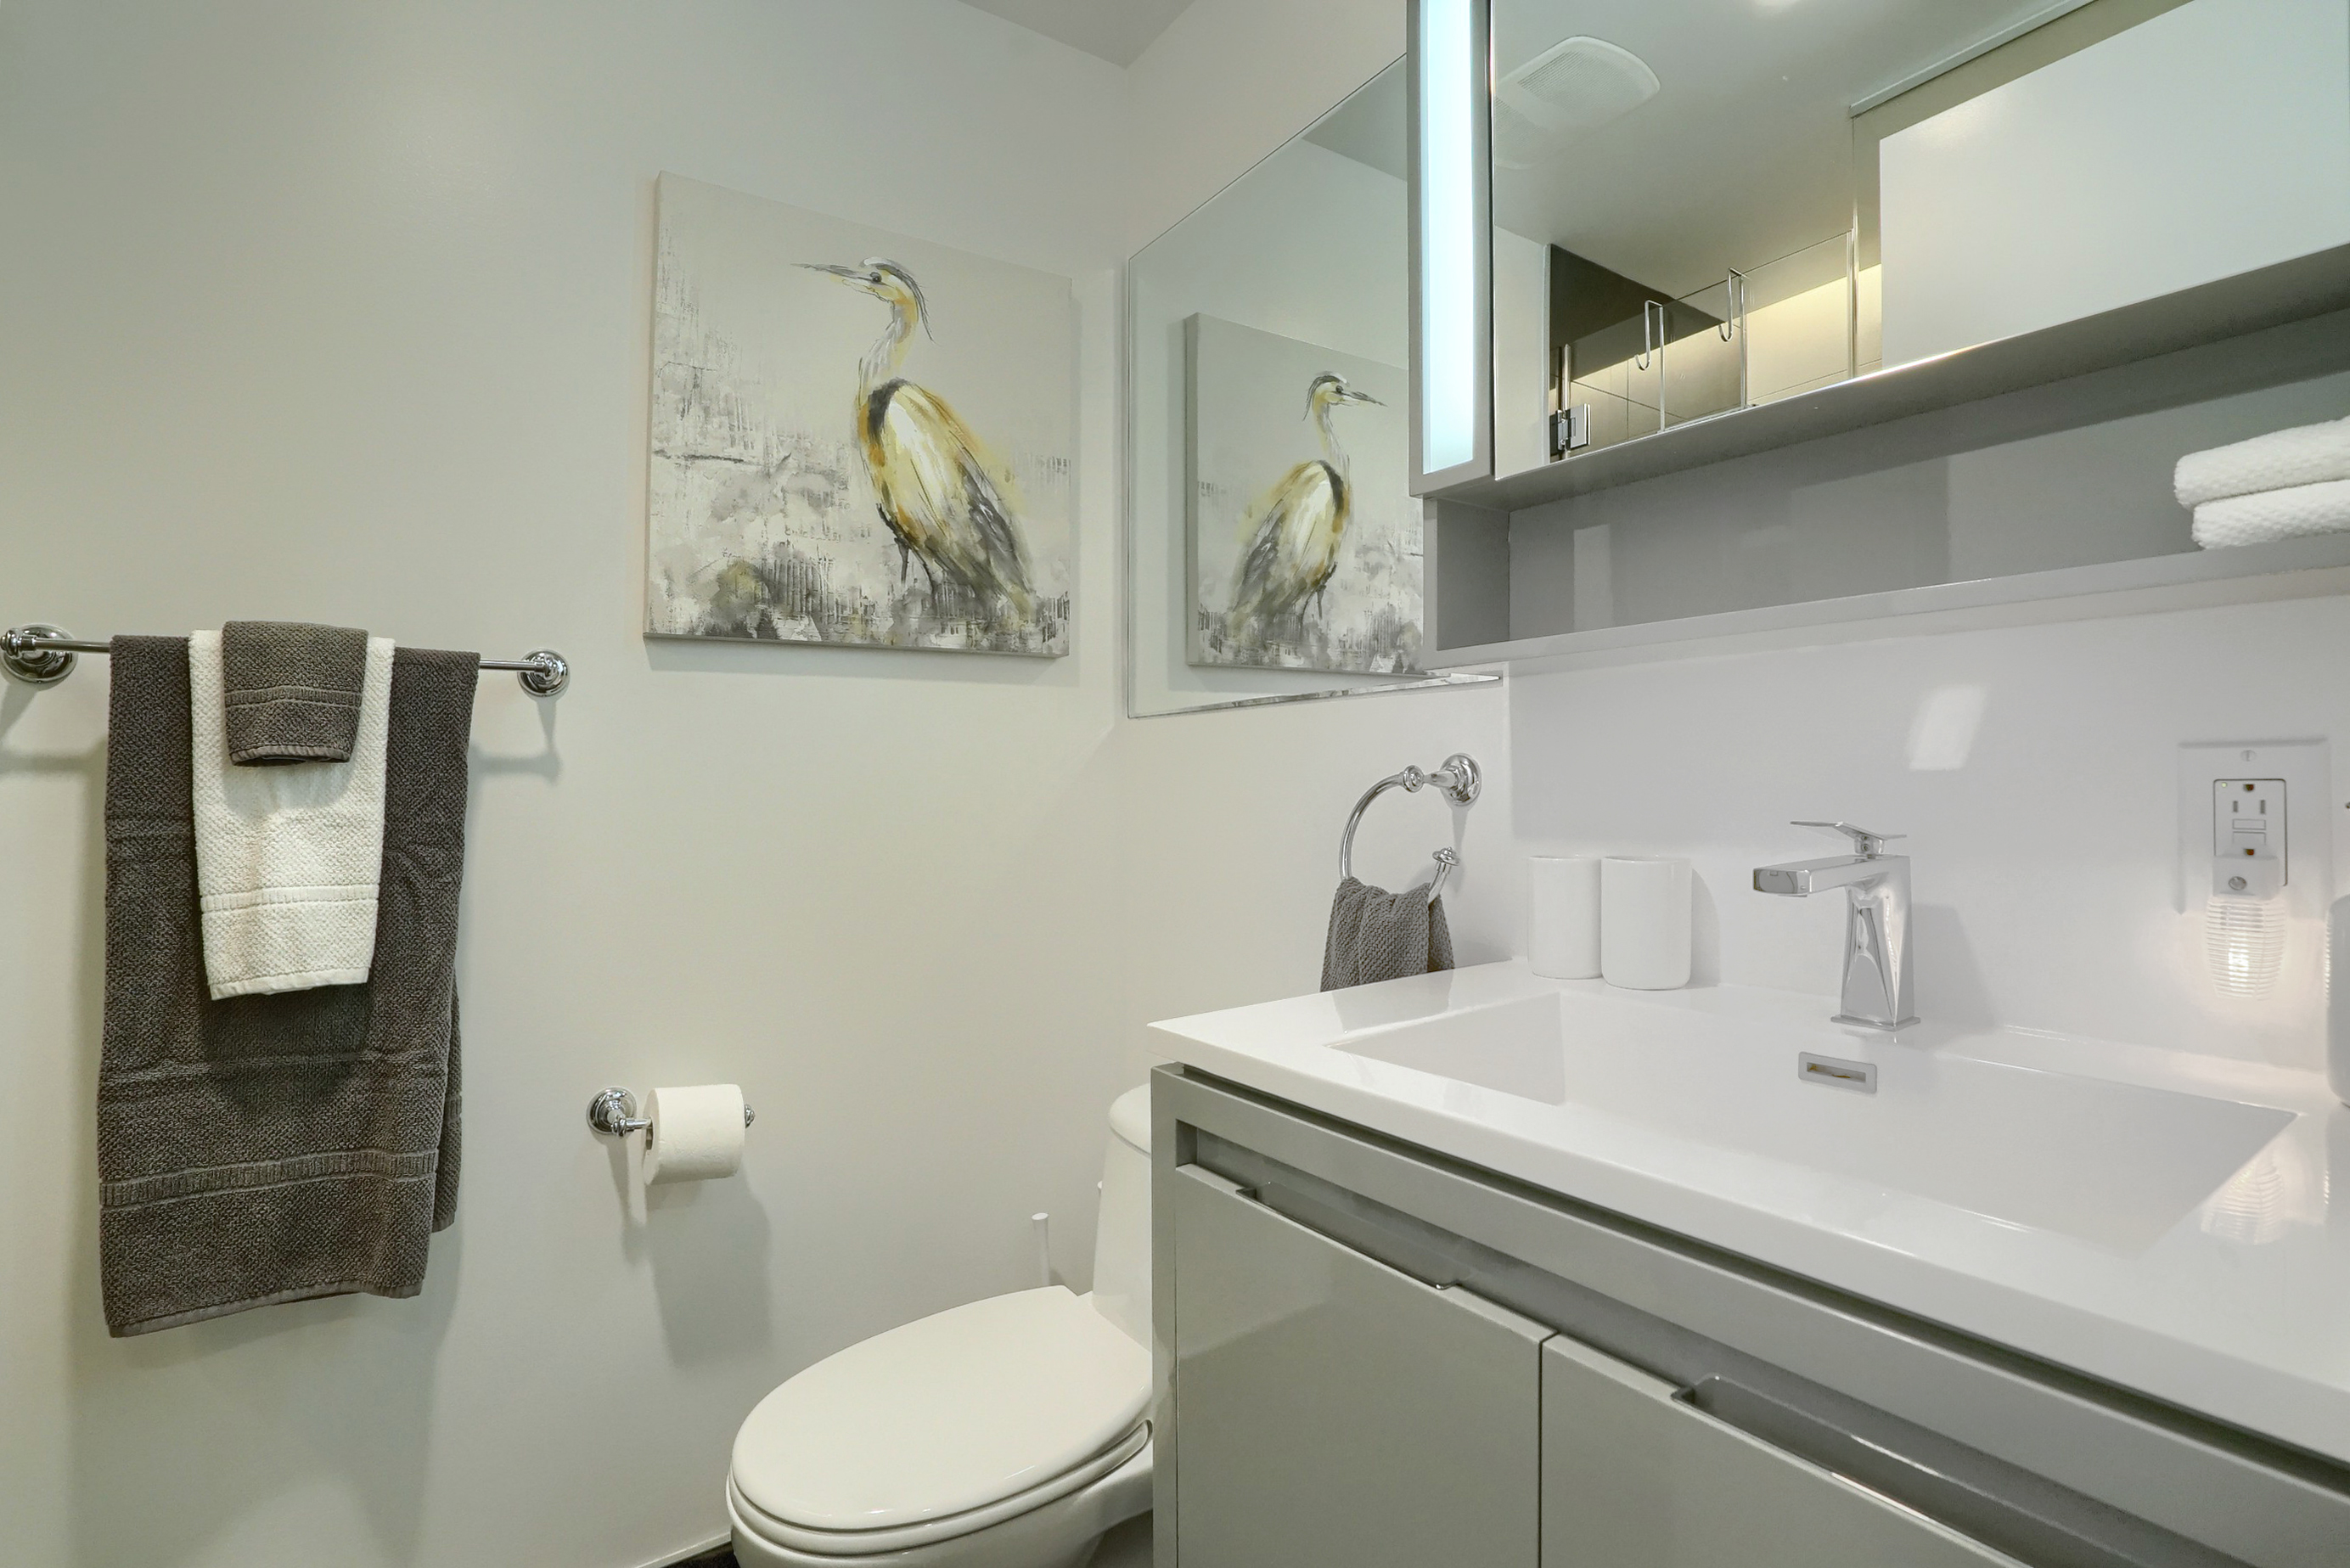 Angled view into the modern and sleek bathroom. Whites and grays. Over-sized white sink with designer stainless faucet. Plush white and gray towels to enhance. Spacious bathroom in this luxury furnished executive housing apartment in montreal